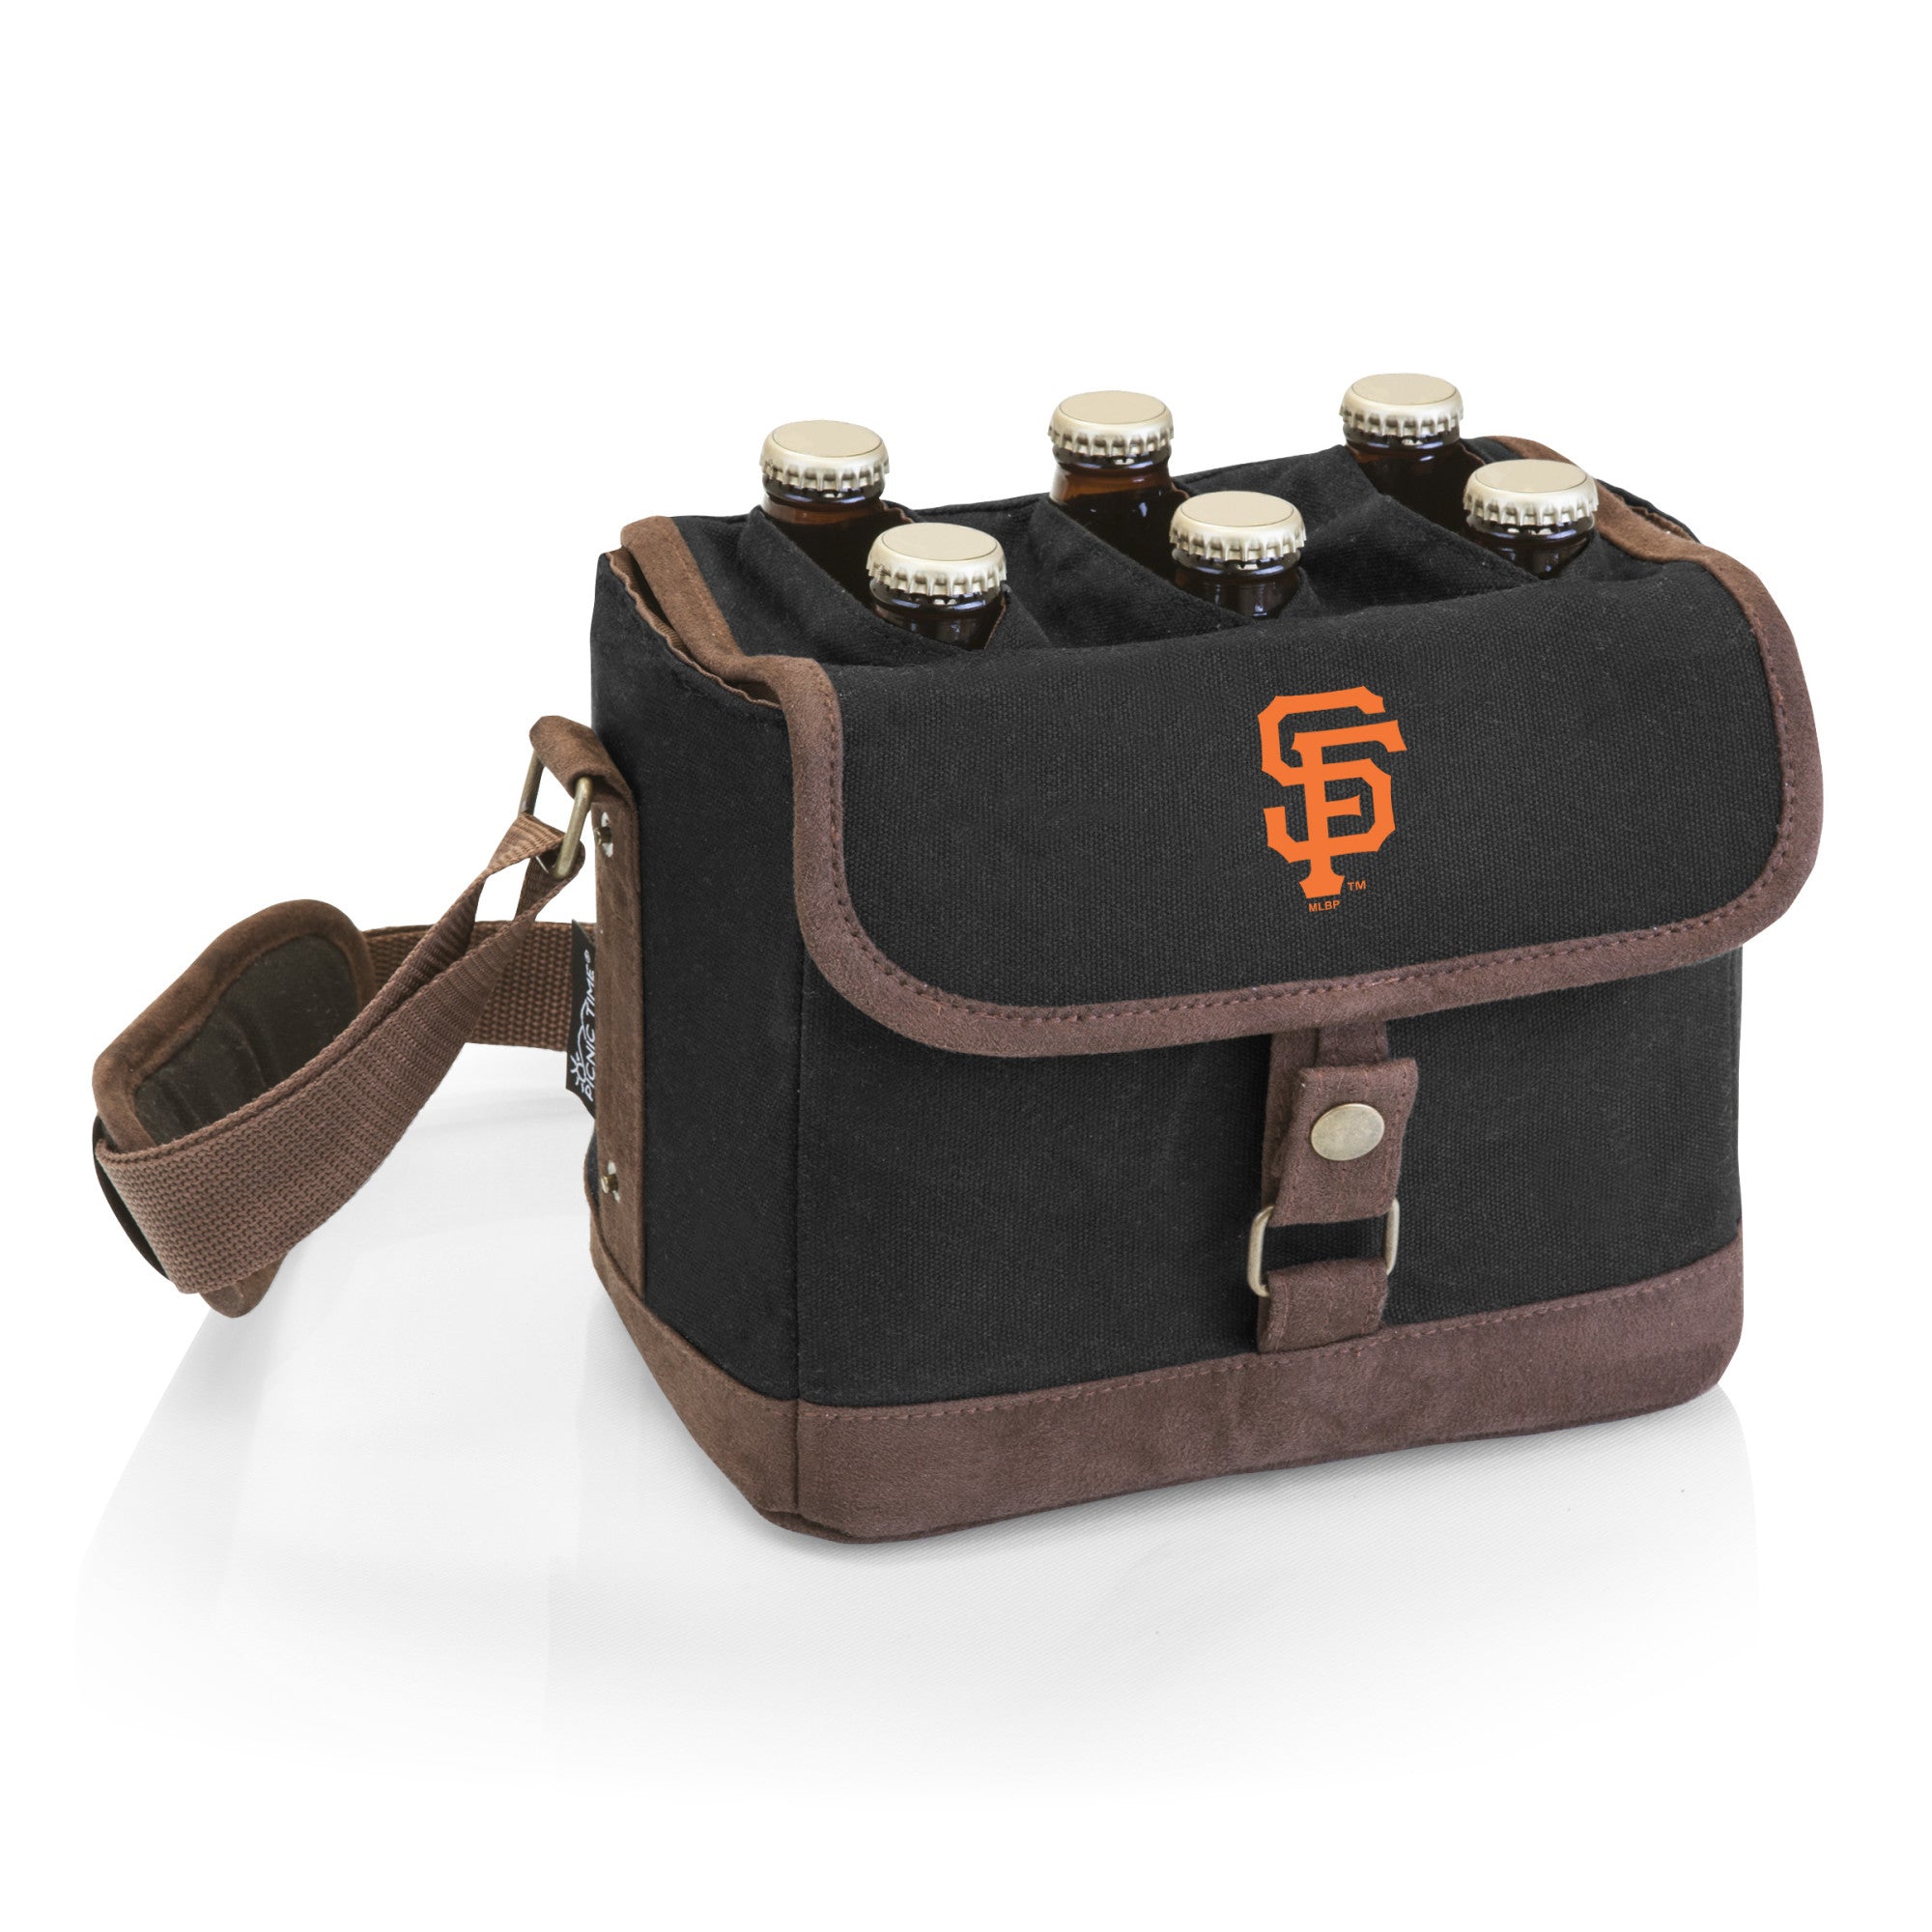 San Francisco Giants - Beer Caddy Cooler Tote with Opener